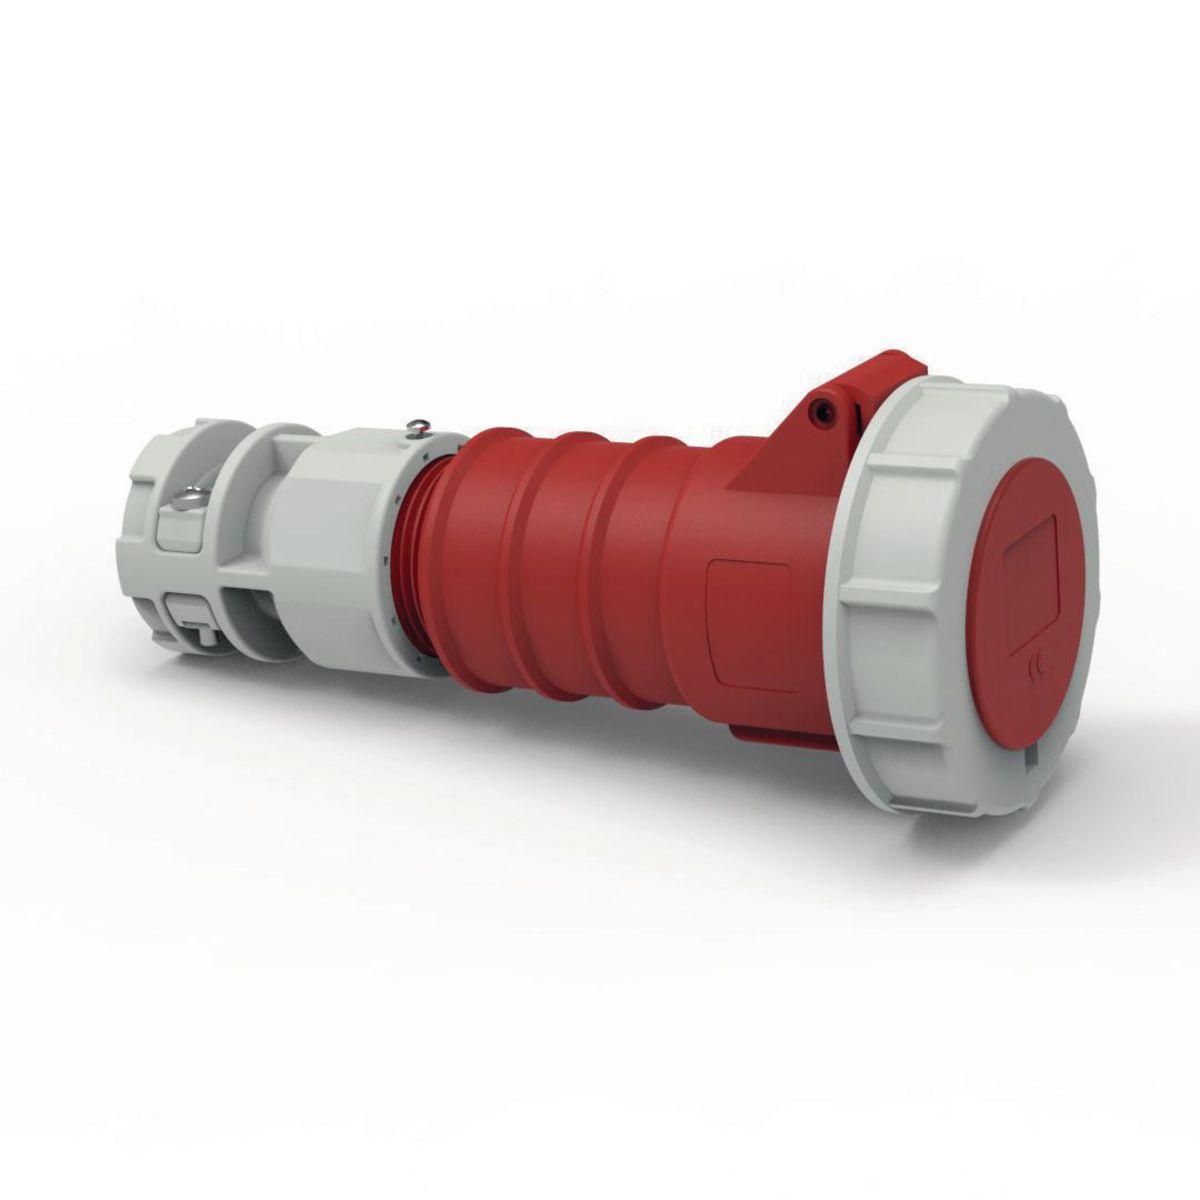 Hubbell C563C6WA Heavy Duty Products, IEC Pin and Sleeve Devices, Hubbell-PRO, Female, Connector Body, 63 A  200-415 VAC, 4-POLE 5-WIRE, Red, Watertight  ; IP67 environmental ratings ; Impact and corrosion resistant insulated non-metallic housing ; Sequential contact enga